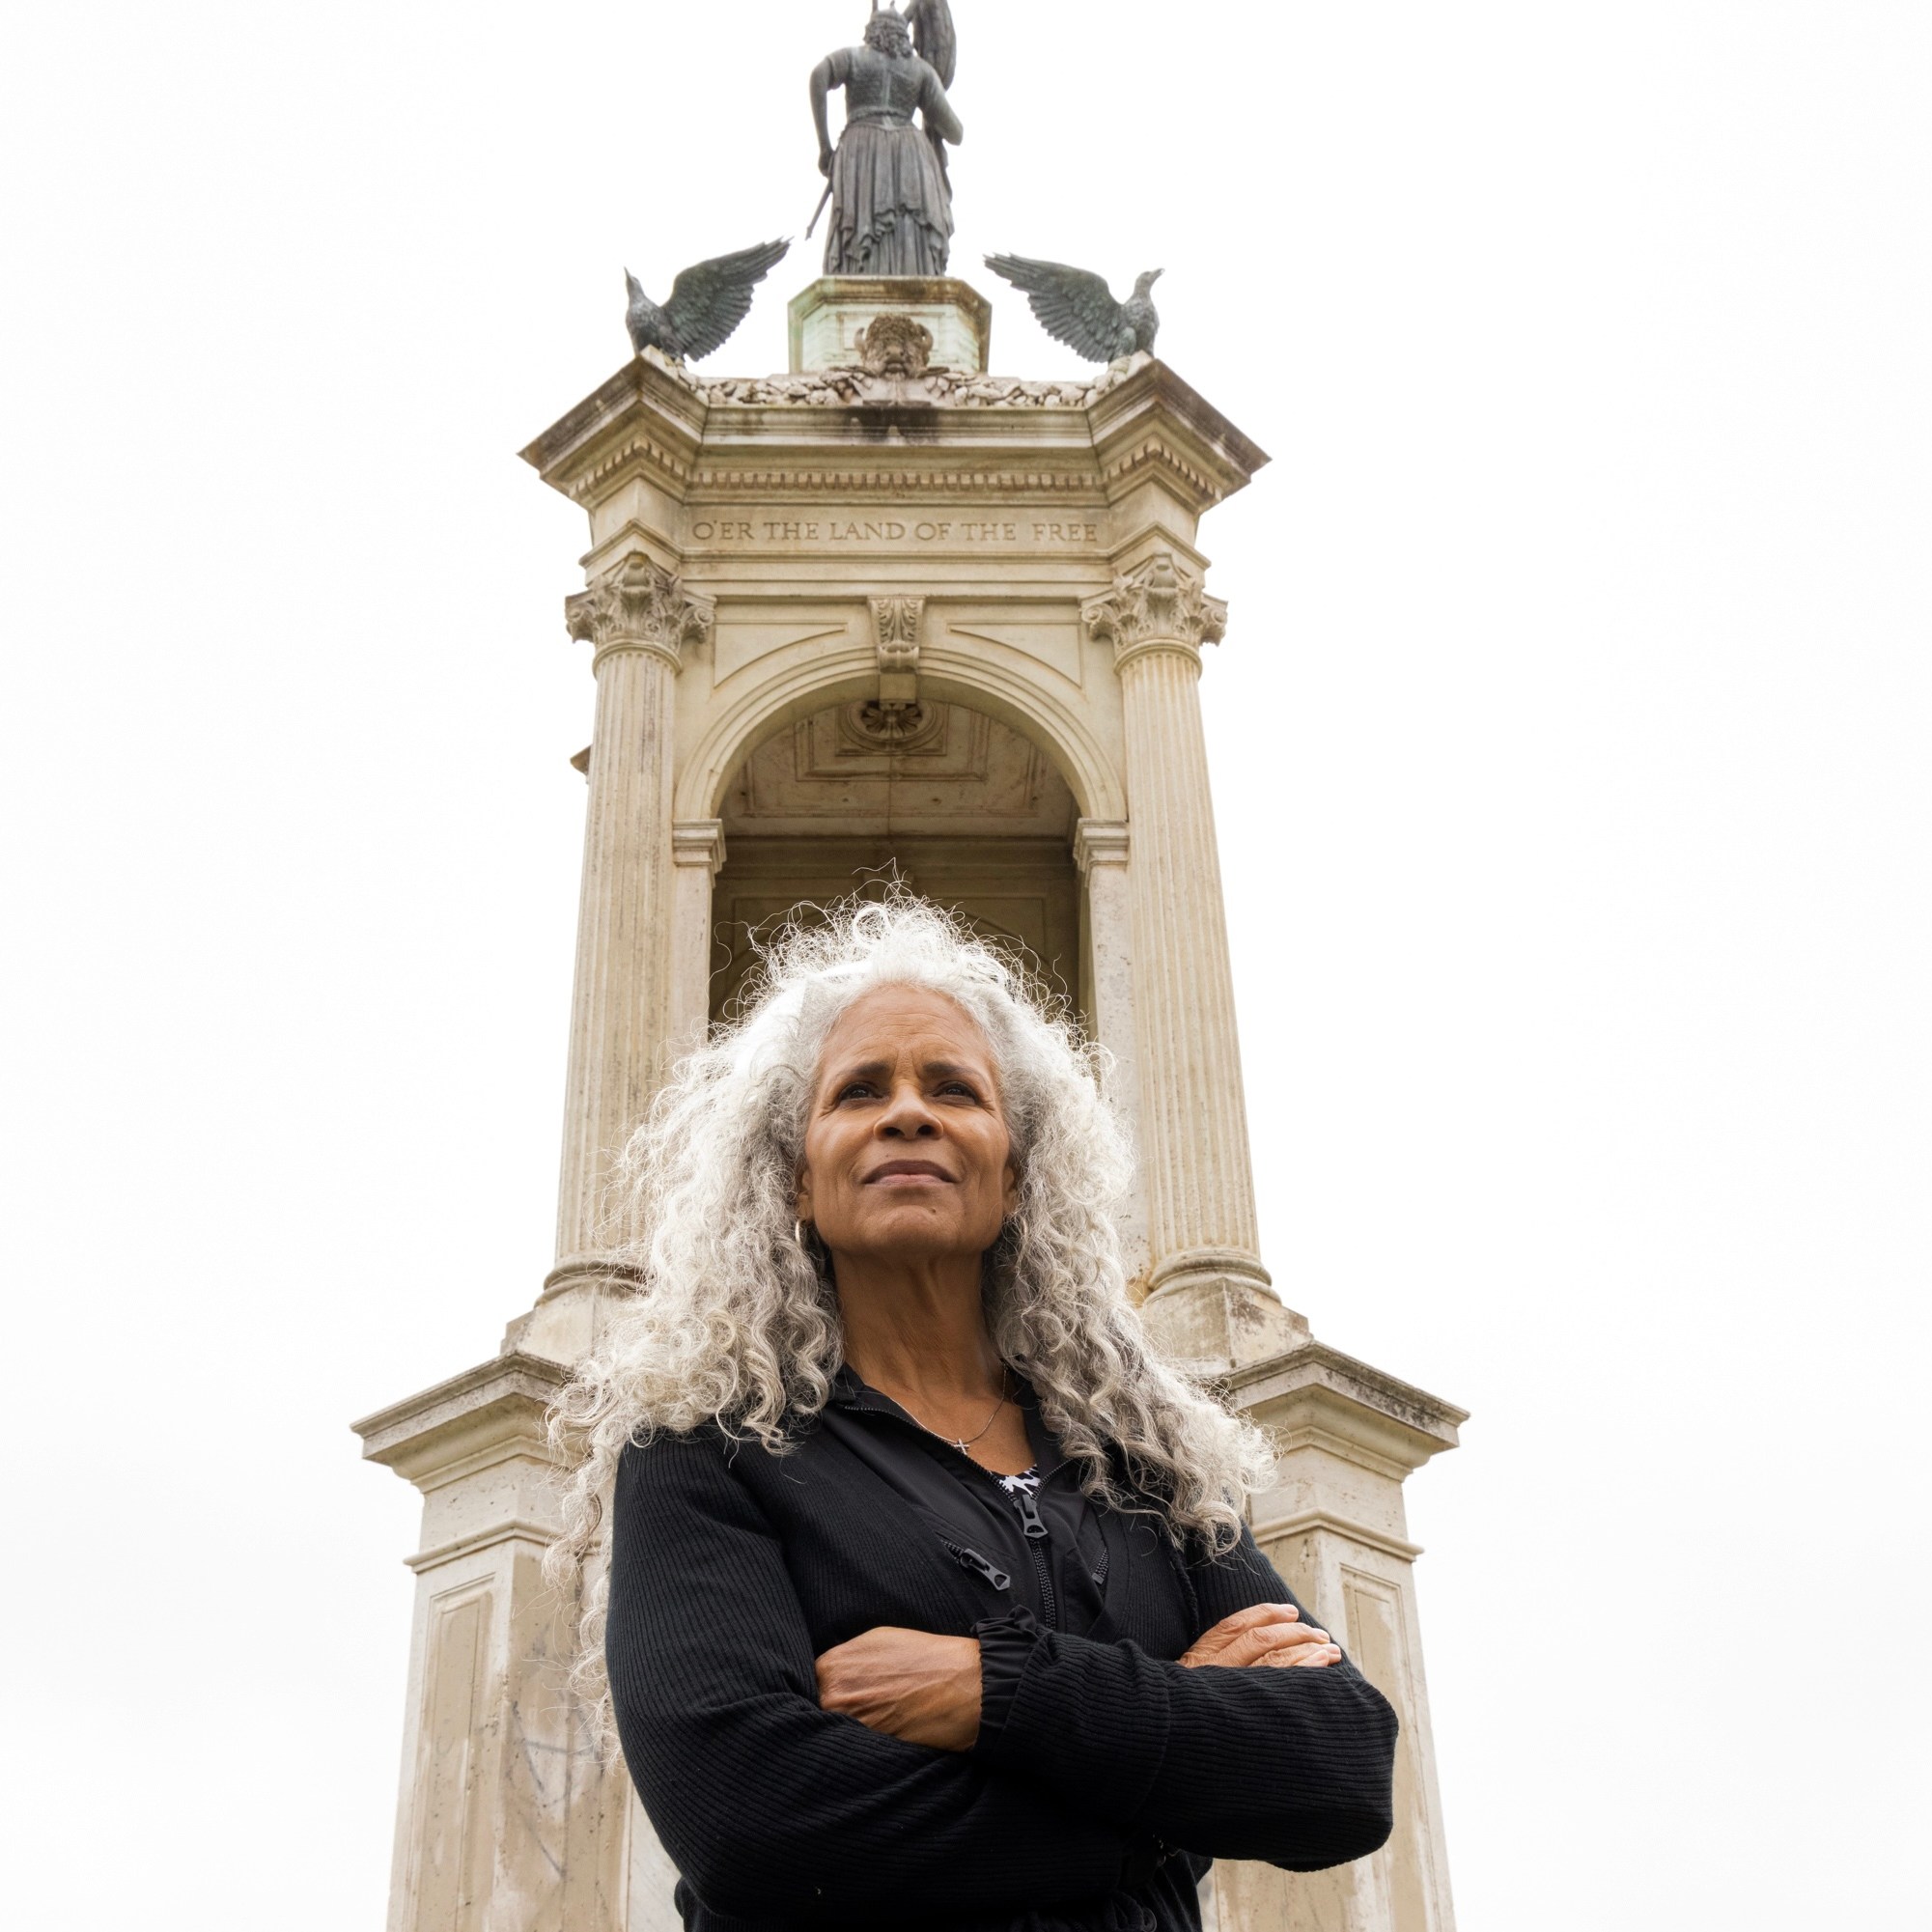 A woman with curly white hair stands confidently with folded arms in front of a tall monument featuring statues and inscriptions against a cloudy sky.